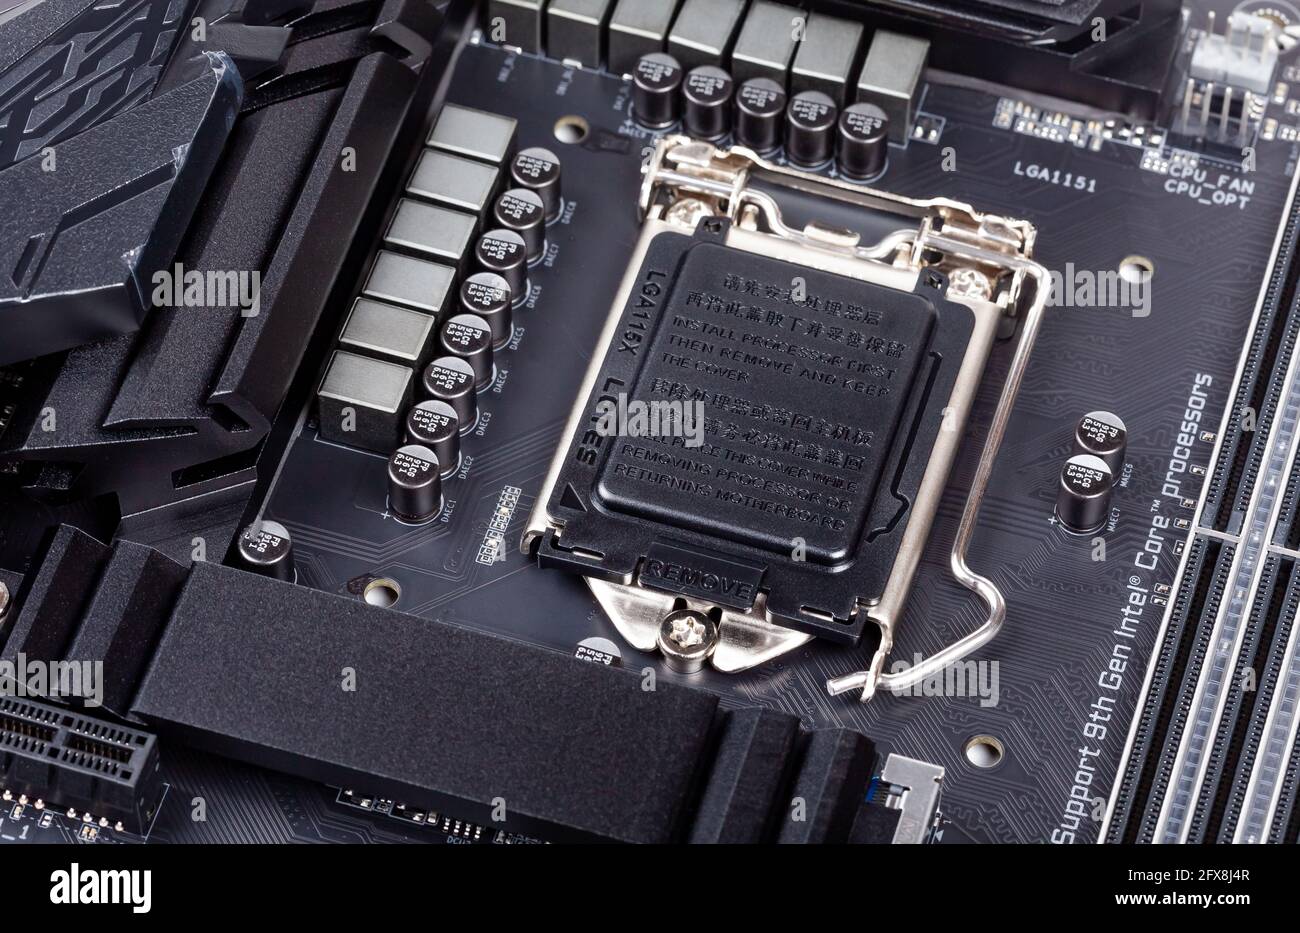 Z390 Aorus Pro Wifi high end motherboard, LGA 1115 x socket, empty CPU slot with plastic lid, socket cover on, product shot, top view, from above, pc Stock Photo